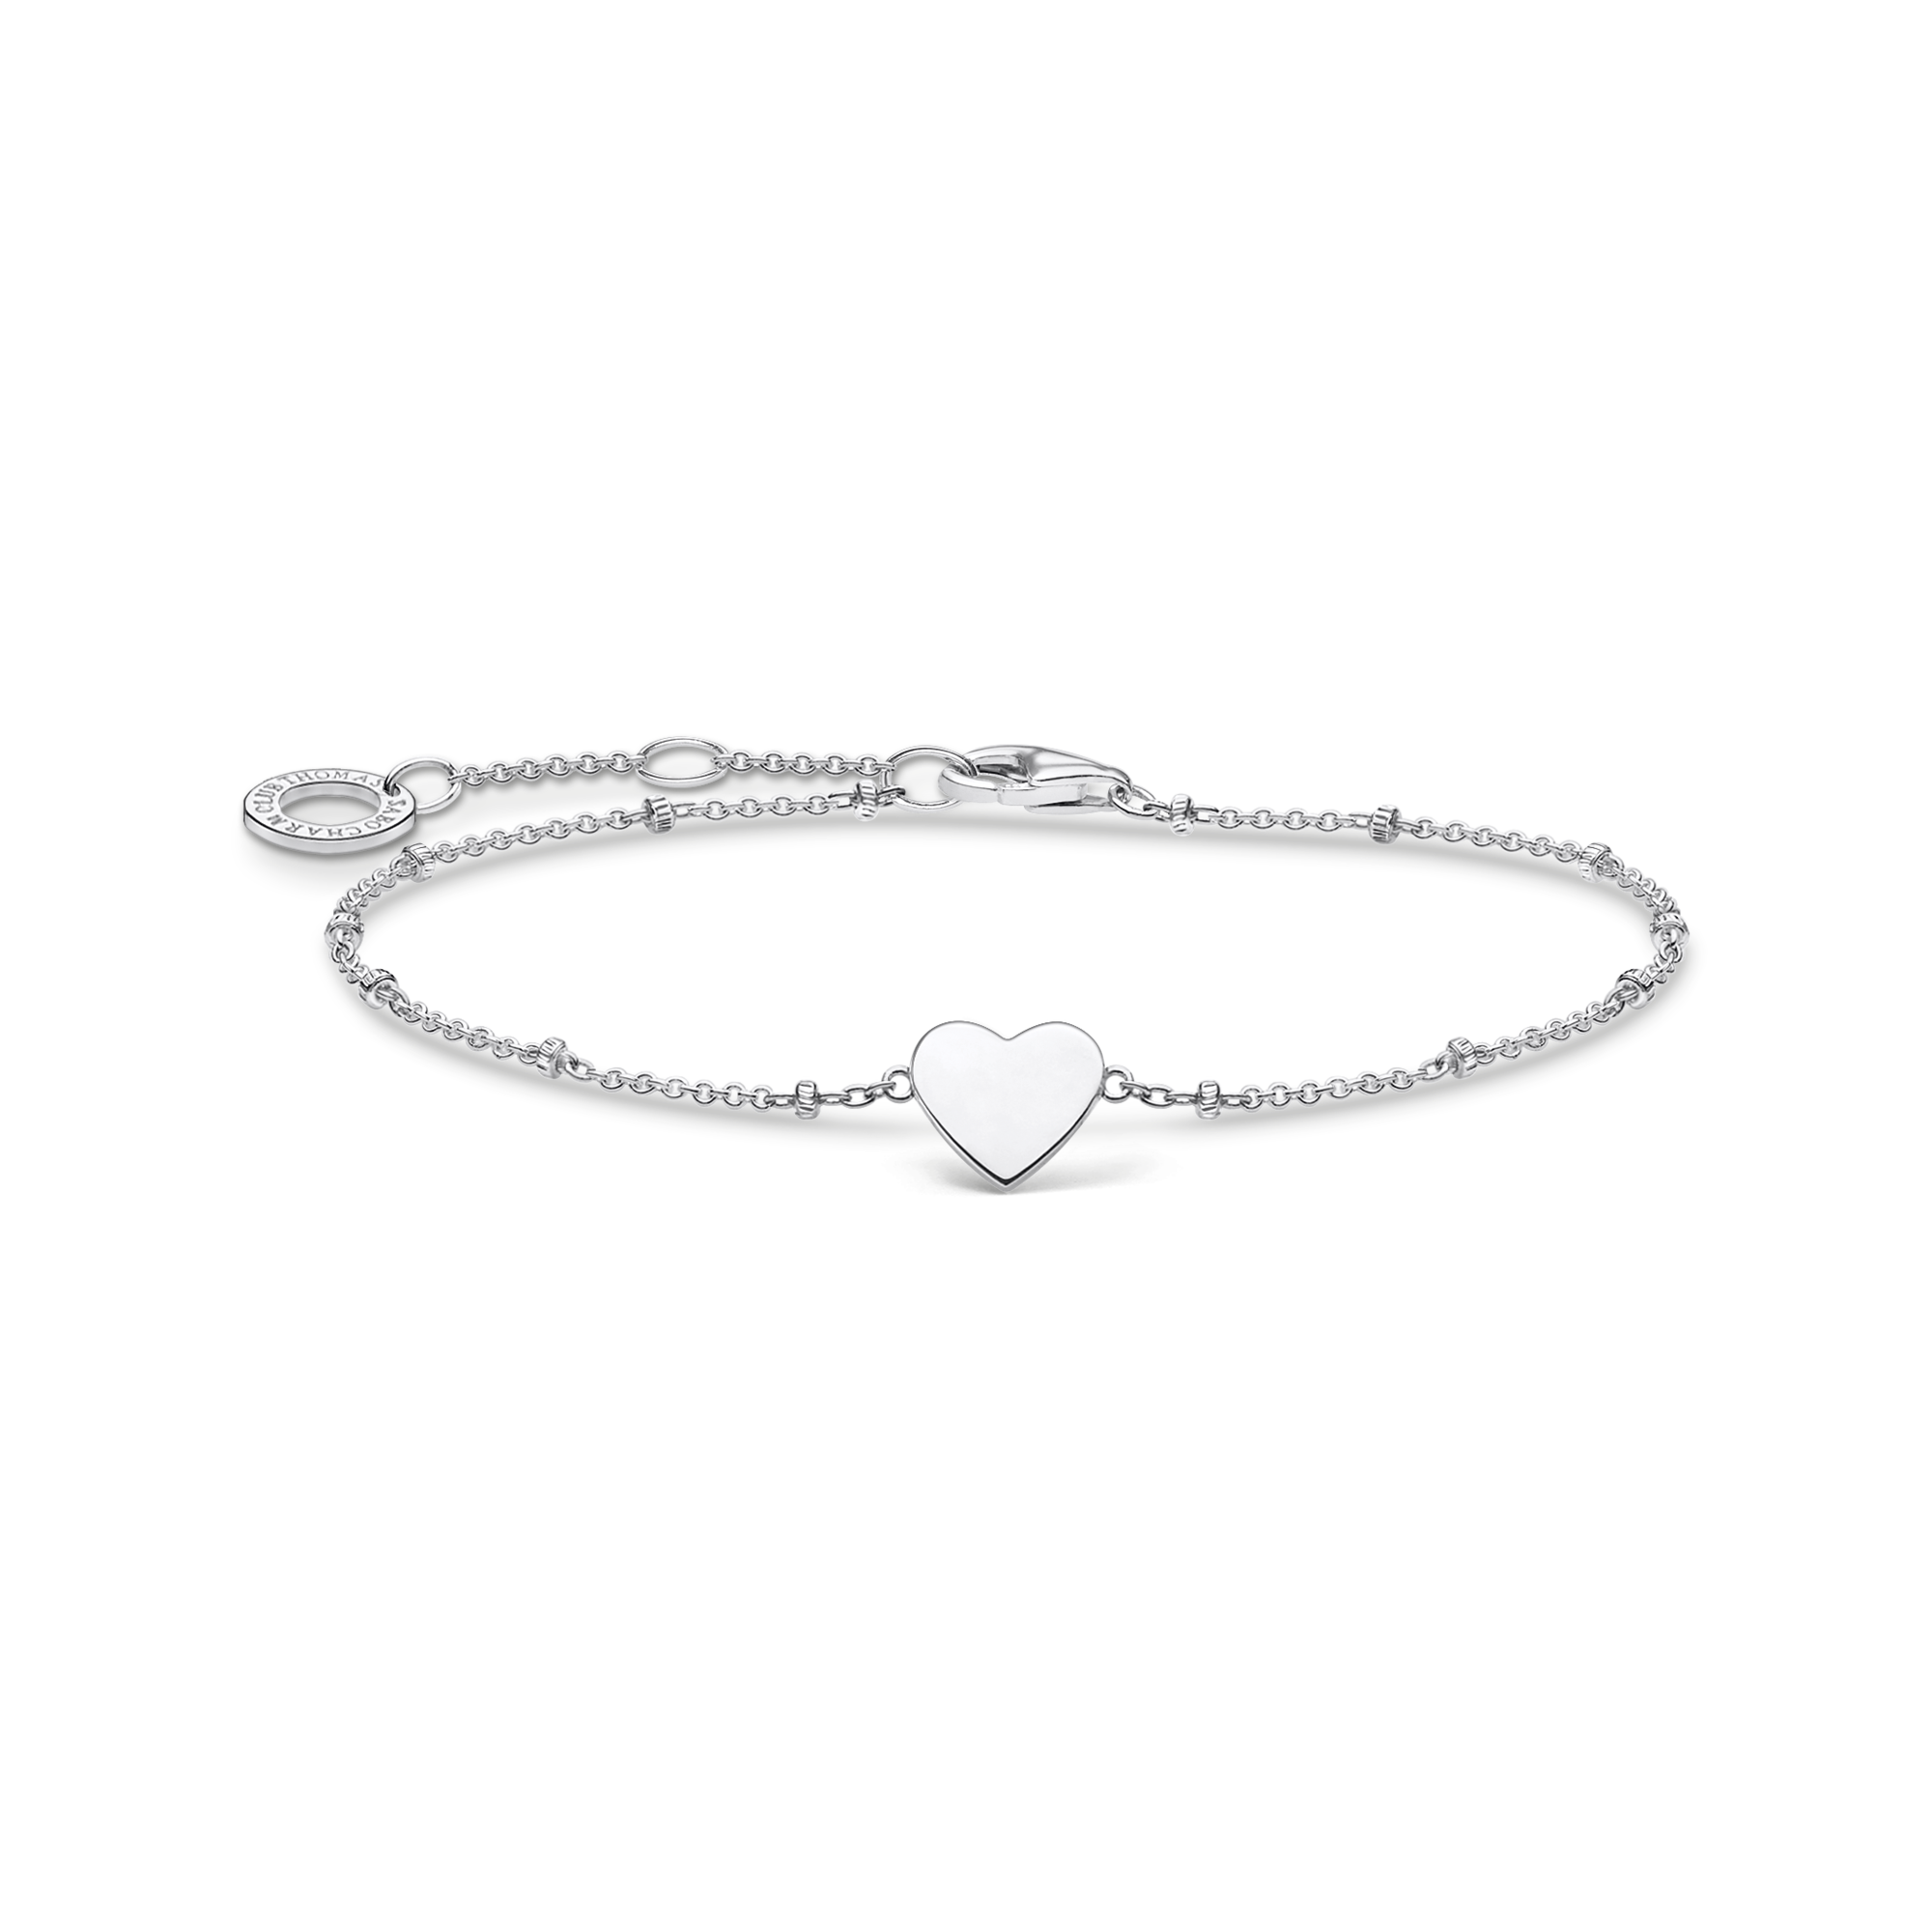 Warren James Jewellers - Make your Friendship last forever with our Rose  Gold finish Sterling Silver Friendship Bracelet - a perfect Christmas gift!  https://bit.ly/2BGdc6o | Facebook